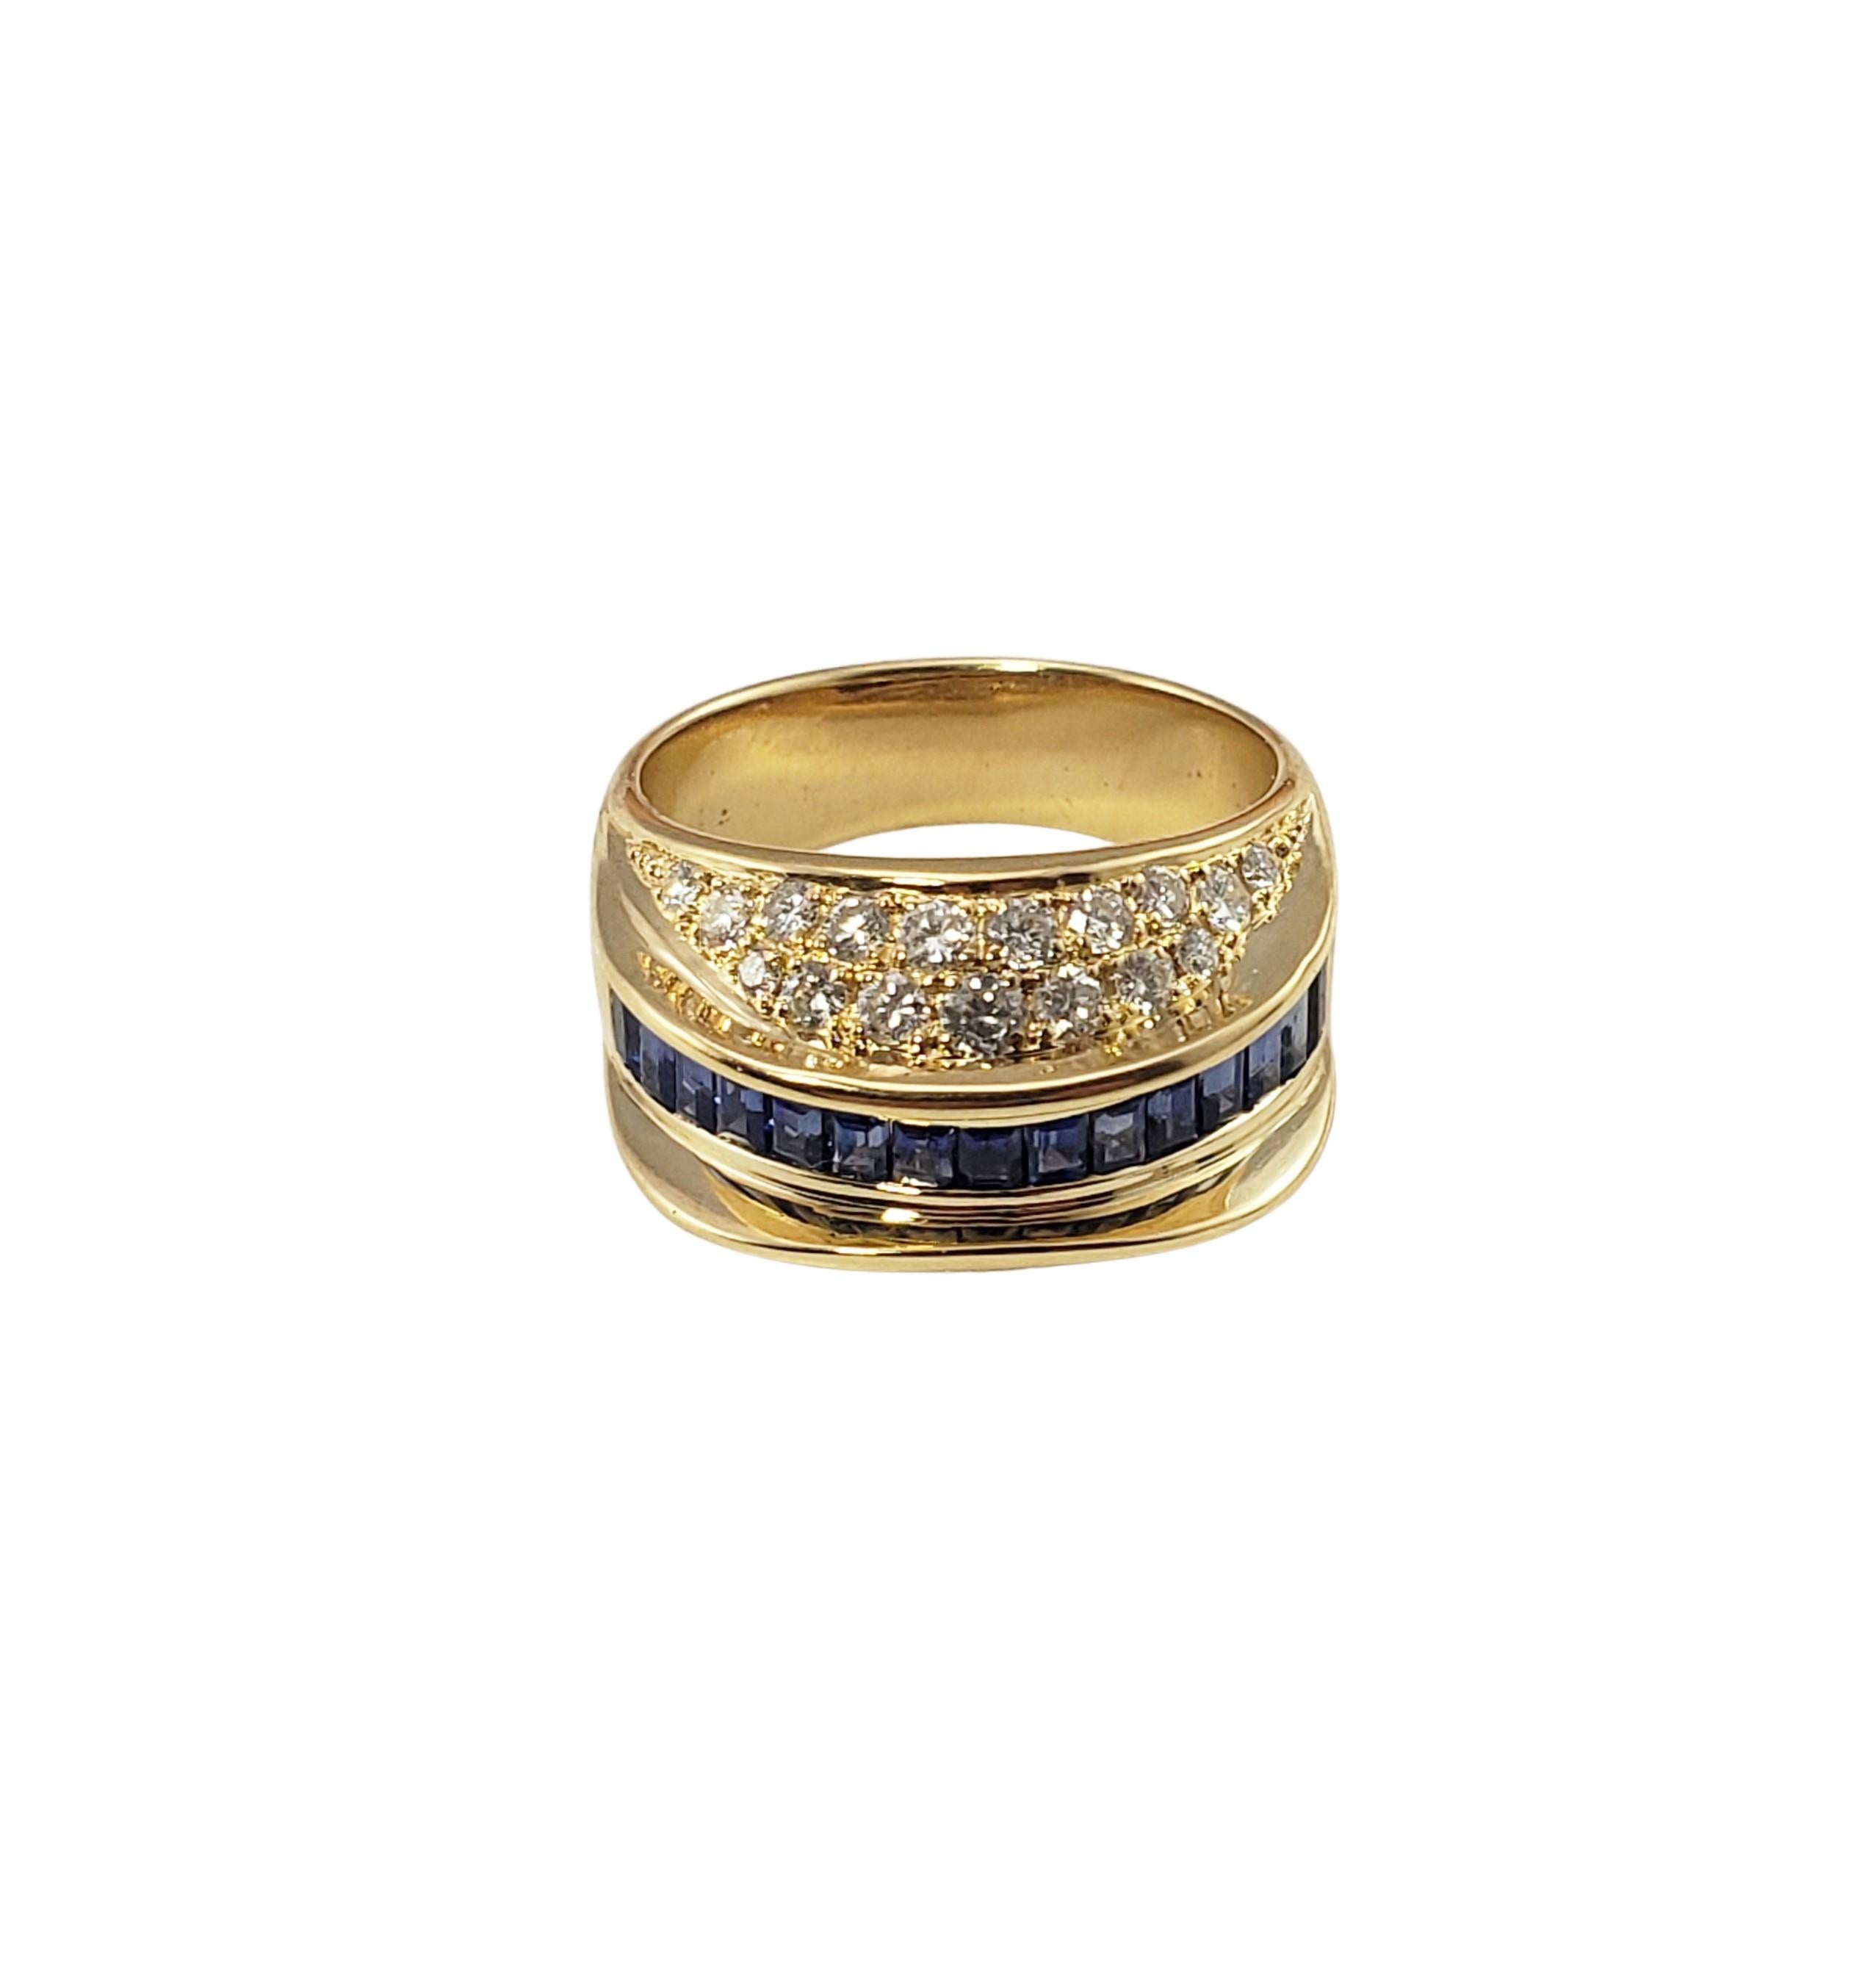 18 Karat Yellow Gold Sapphire and Diamond Ring Size 6.75 GAI Certified-

This stunning ring features baguette cut sapphires and round brilliant cut diamonds set in beautifully detailed 18K yellow gold.  Width:  12 mm.  Shank:  6 mm.

Total diamond